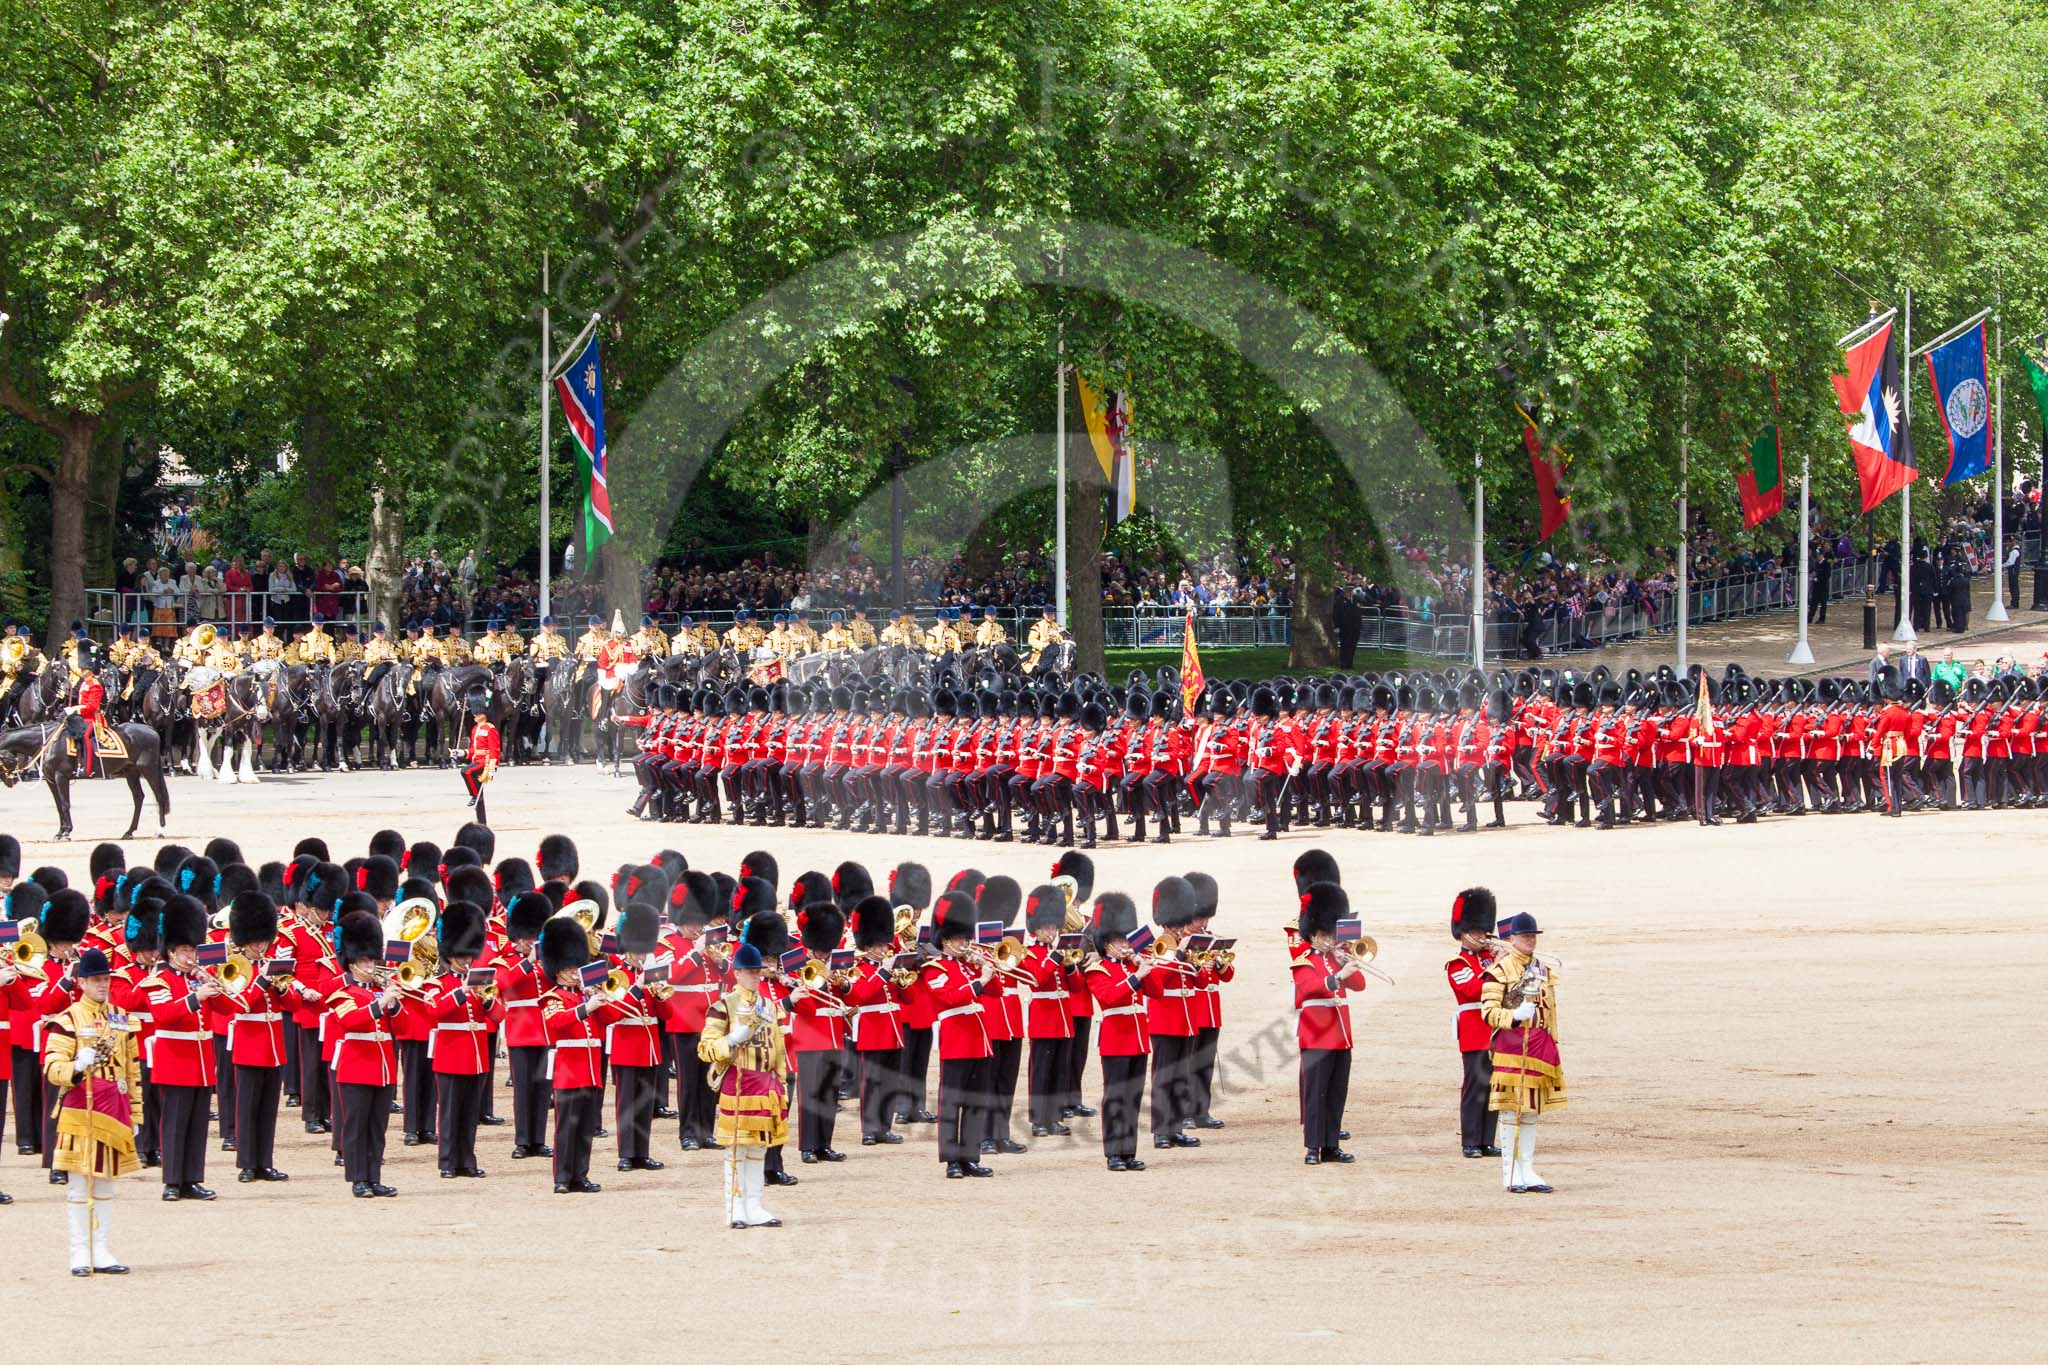 Trooping the Colour 2013: The March Past in Quick Time. The guards are marching beween the Massed Bands, in front, and the Mounted Band of the Household Cavalry behind them. Image #618, 15 June 2013 11:48 Horse Guards Parade, London, UK